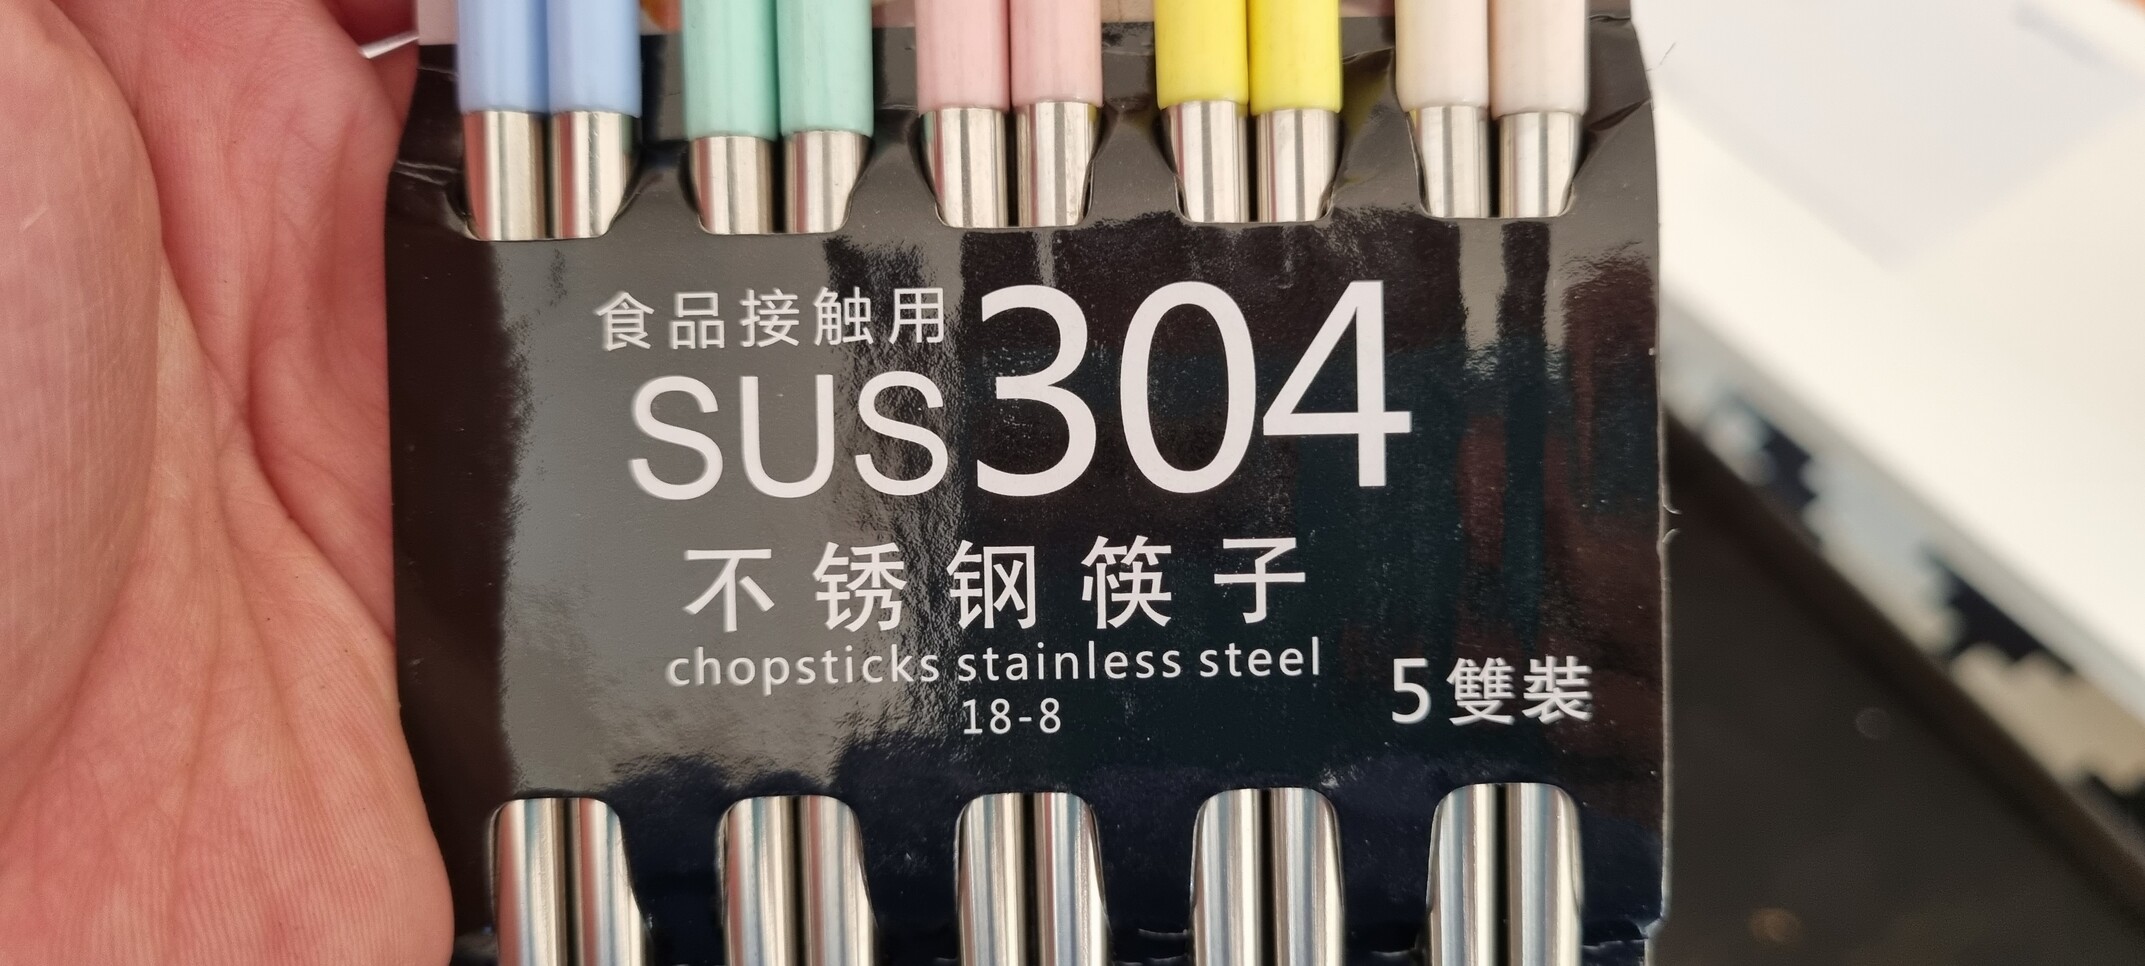 Close up of the packaging of chopsticks. There are some carachters I can't read but google translated them to things such as "nice lifestyle eating chopsticks".. The biggest text however is "SUS 304"